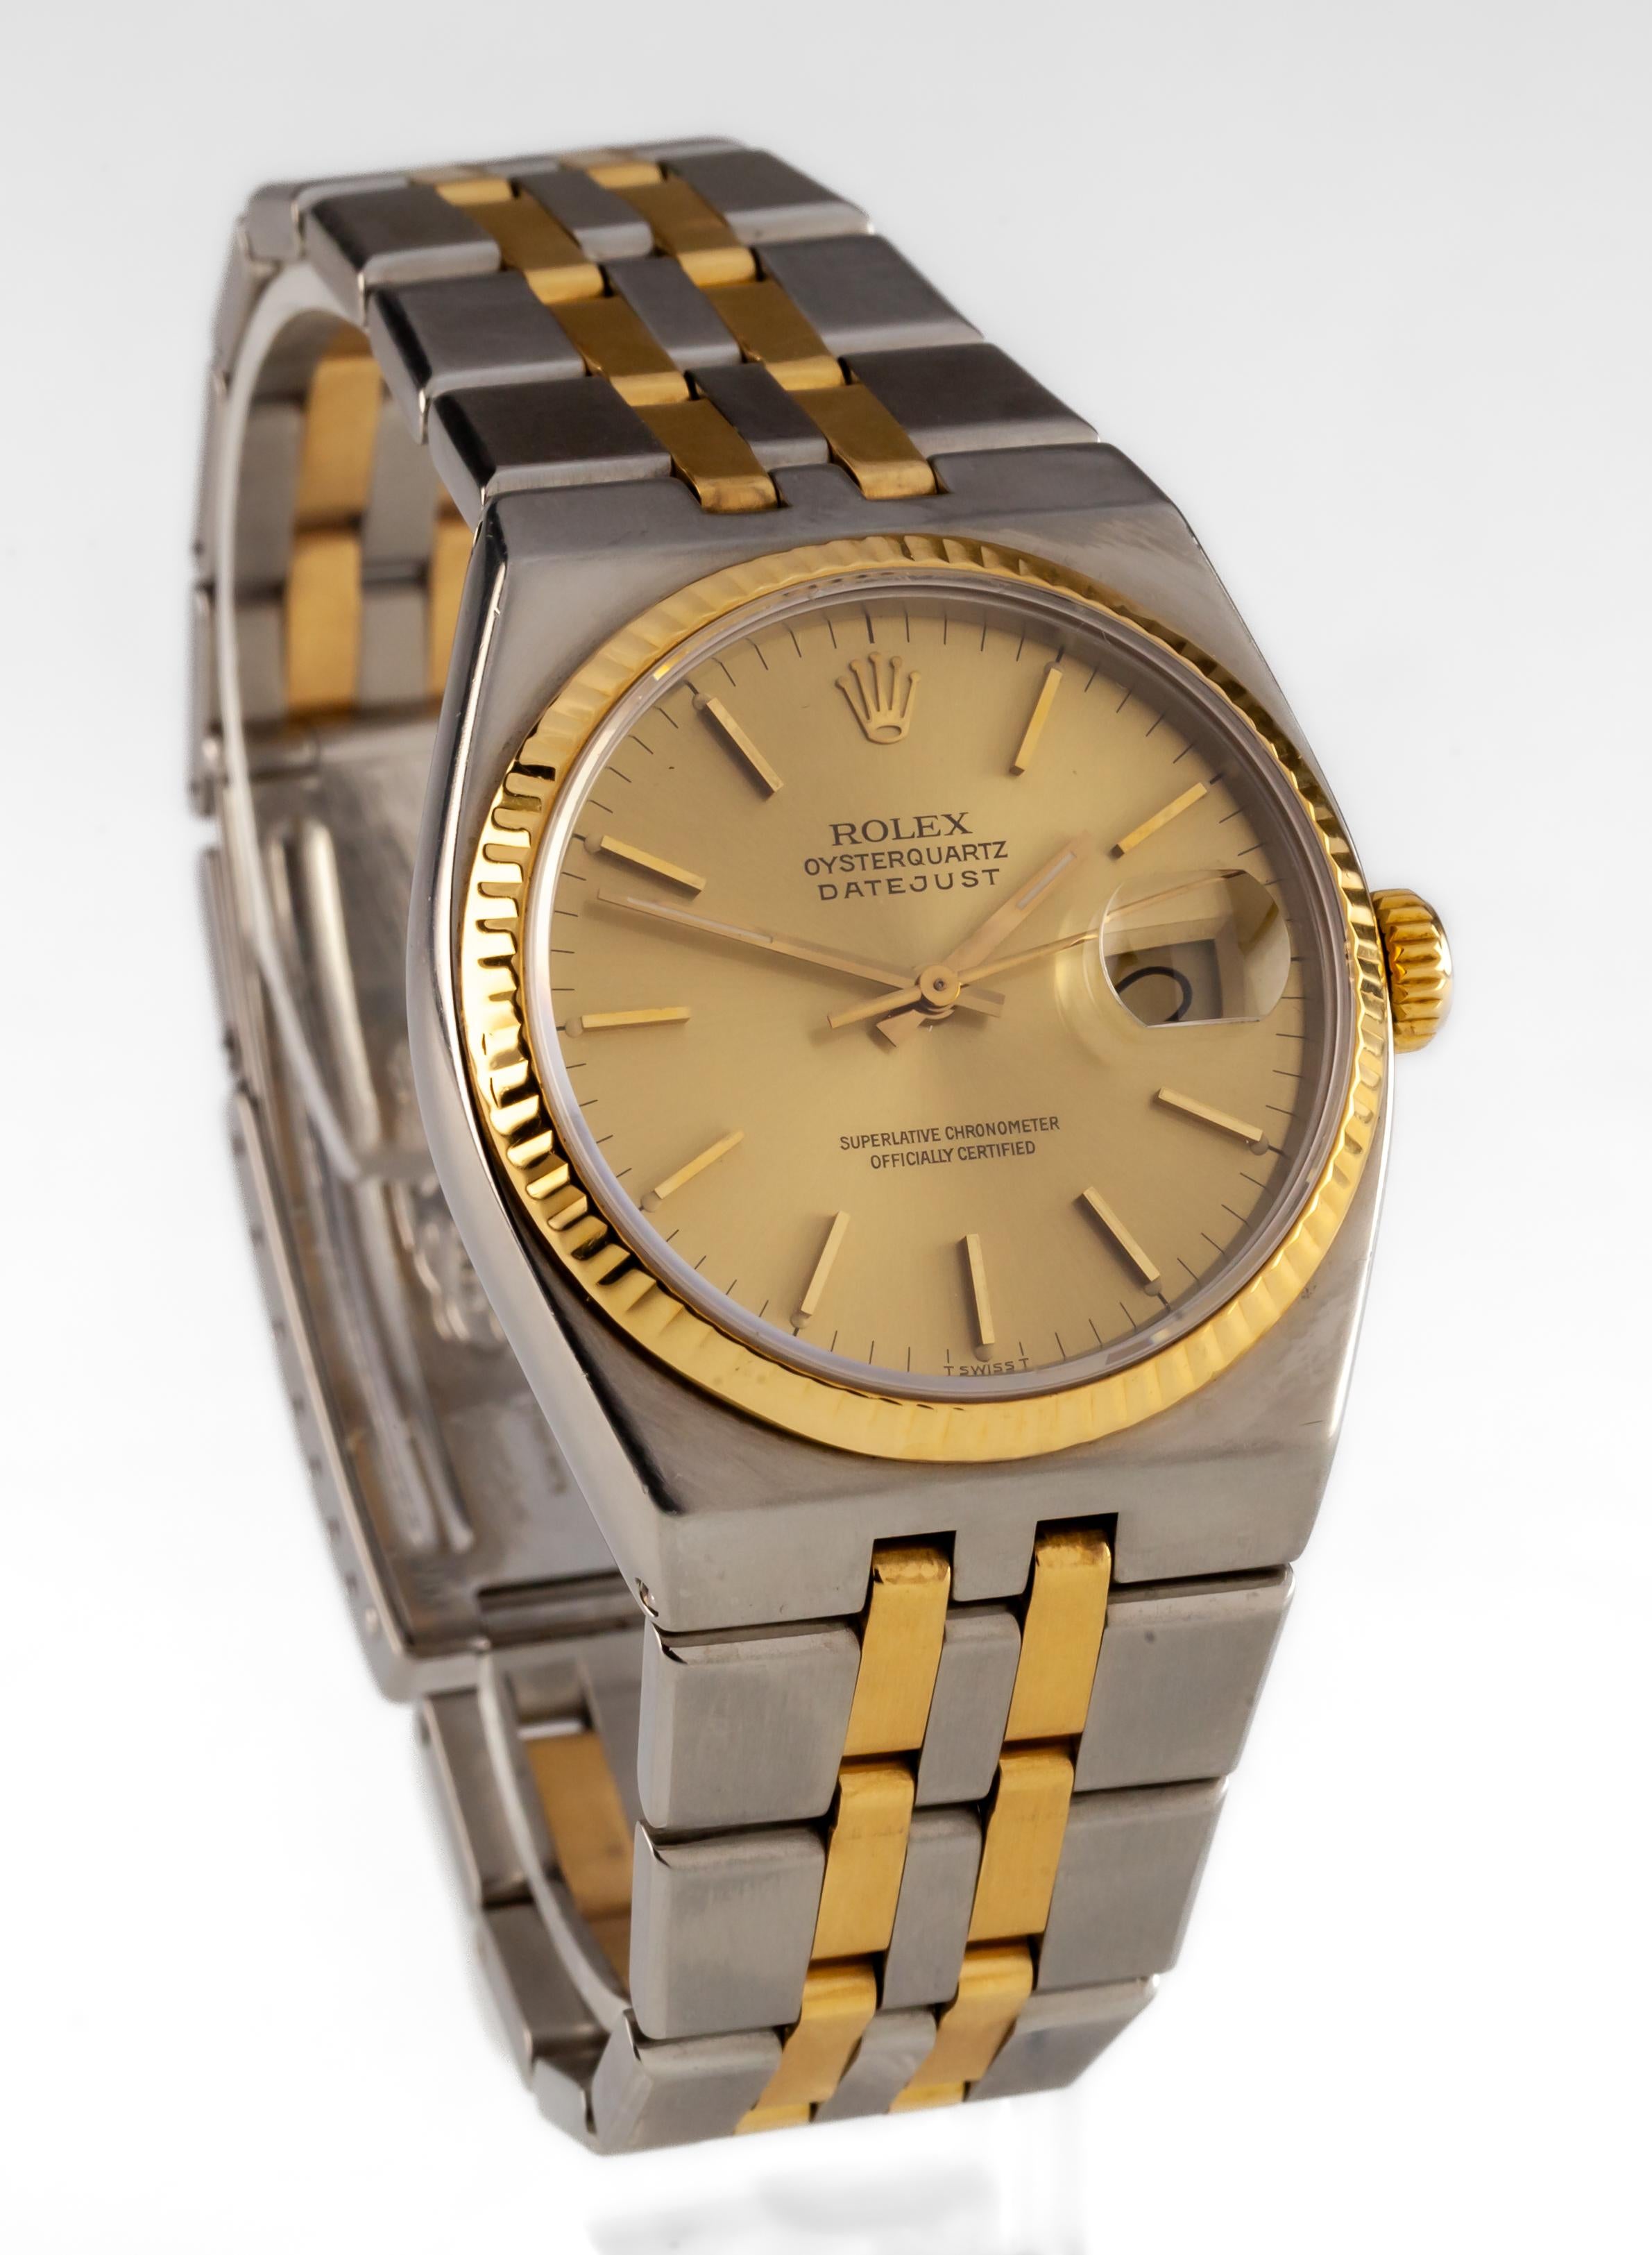 Rolex Two Tone Oysterquartz Men's Watch w/ Gold Dial 17013 1986 FULL LINKS For Sale 3